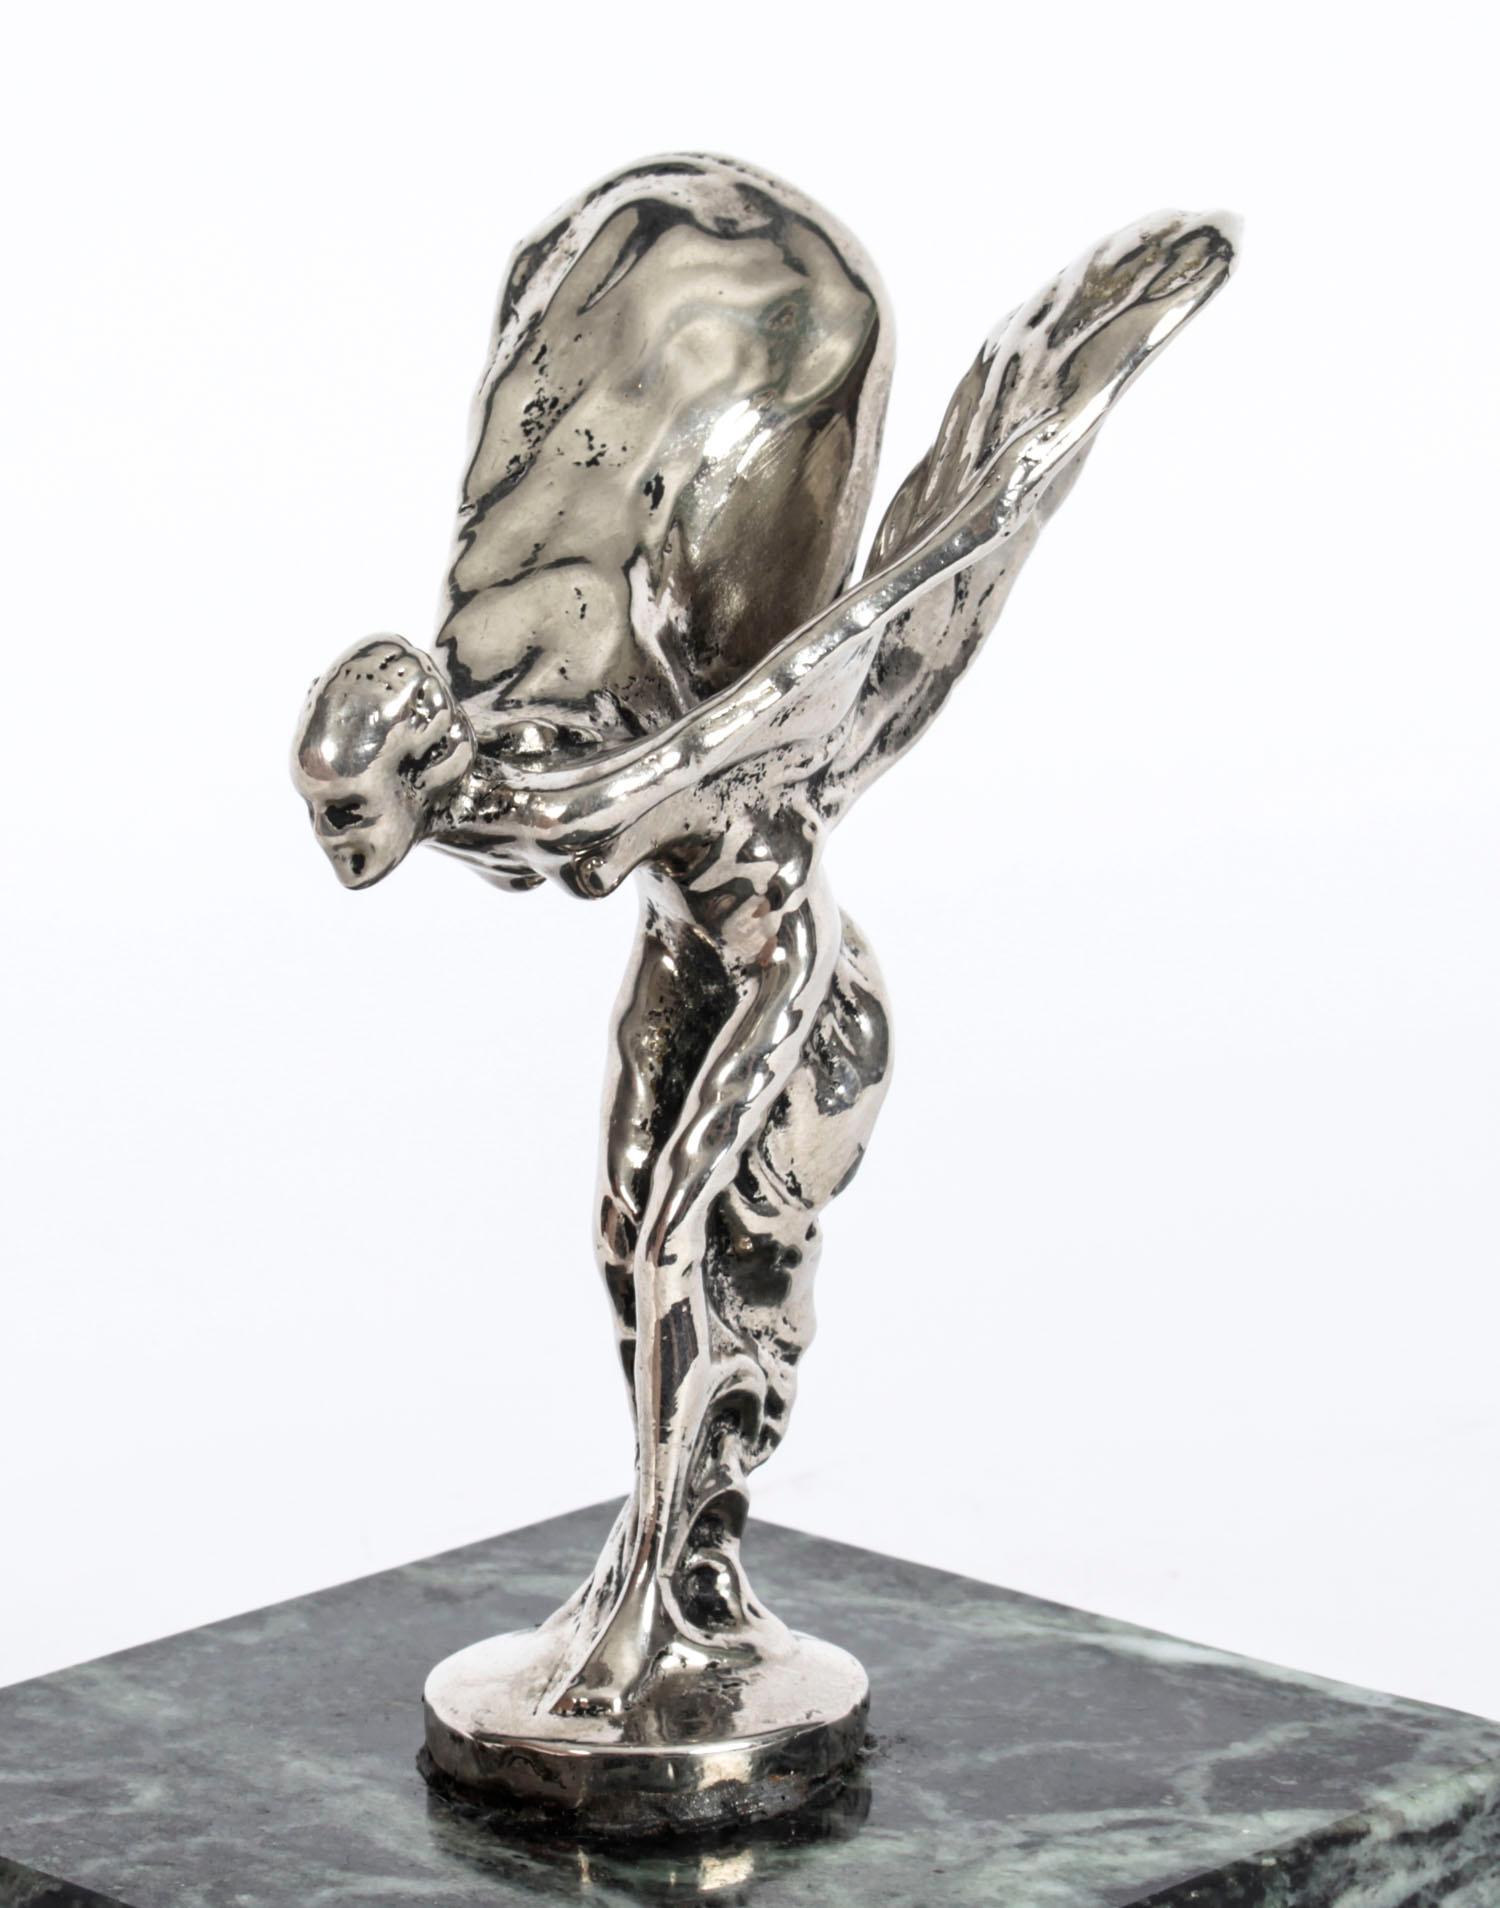 A beautiful vintage decorative Rolls Royce silver plated car mascot, The Spirit of Ecstasy dating from the mid 20th century.

The winged maiden was designed by Charles Robinson Sykes (1875-1950), and she stands on an attractive square verde antico